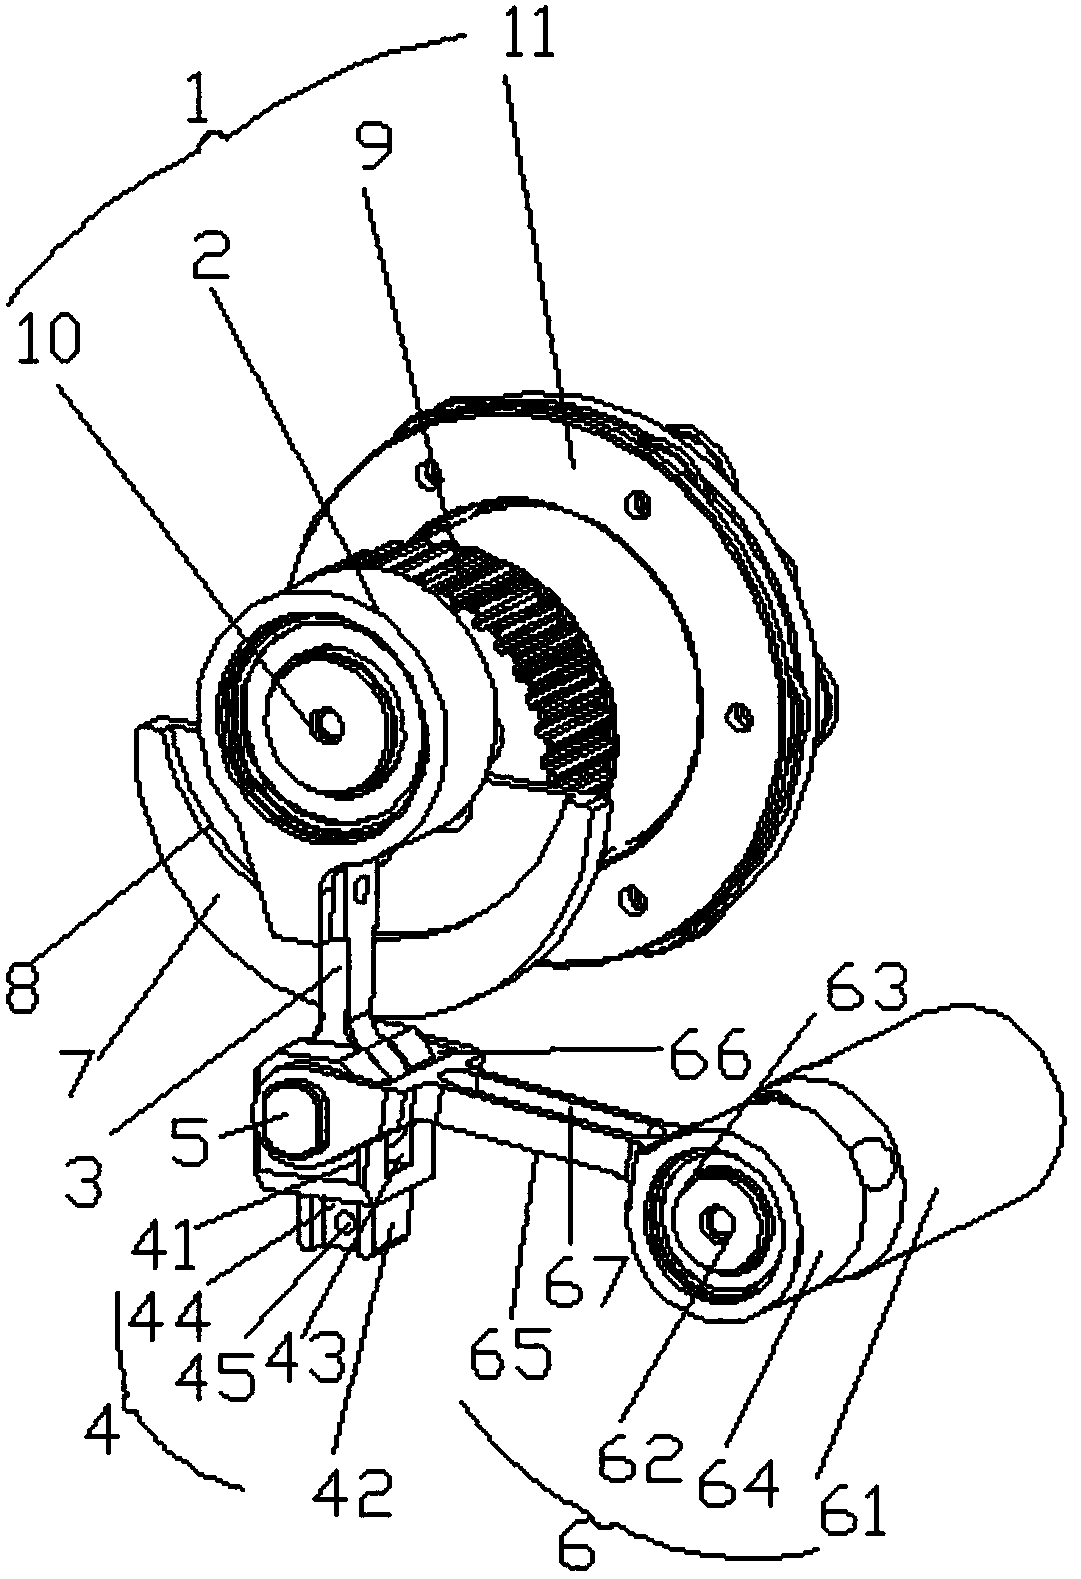 Machine head cutter swing arm and connection rod device